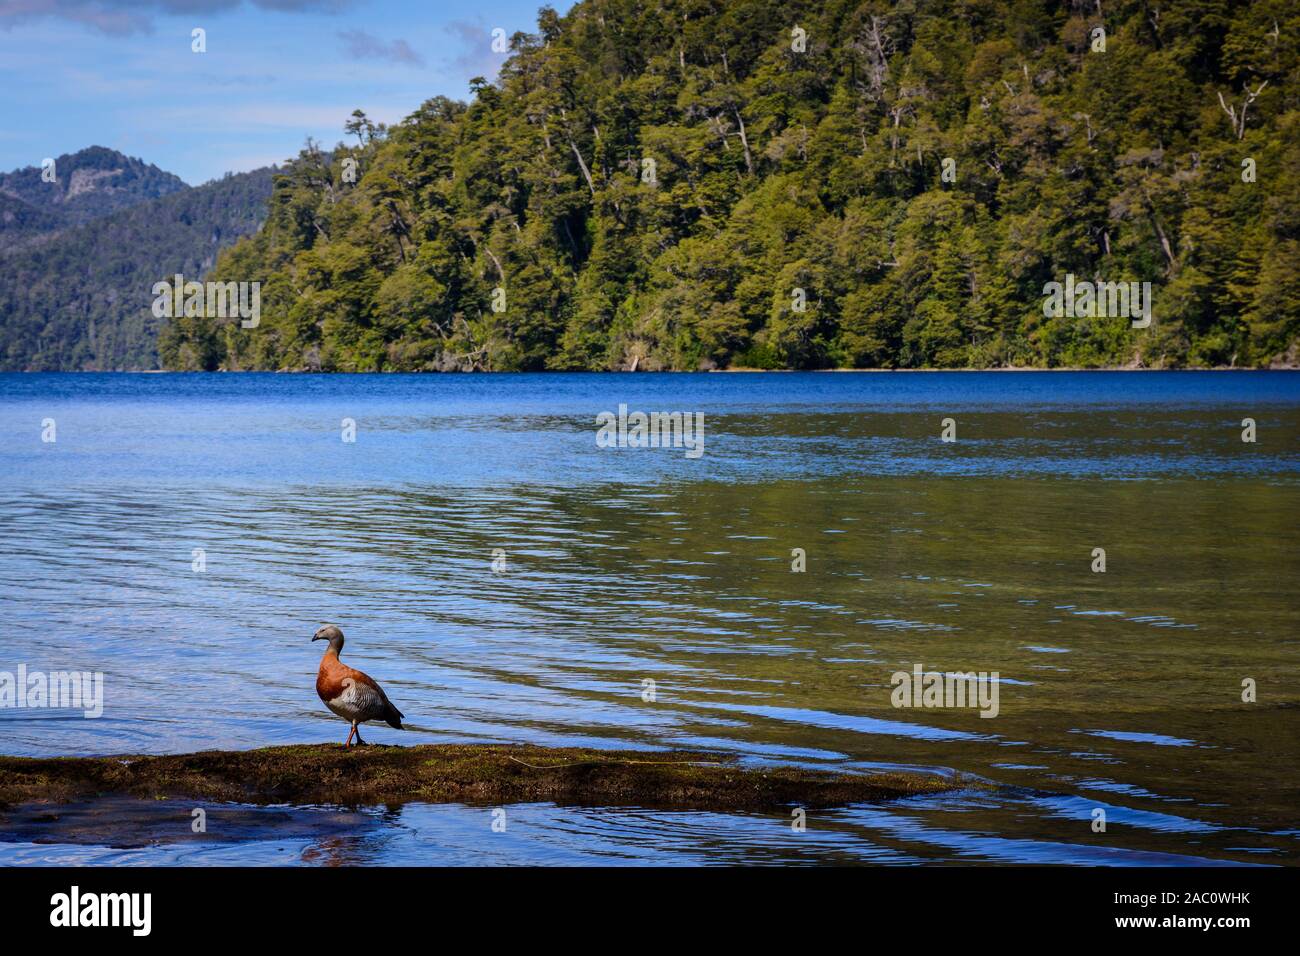 Scene view of an Upland goose on the lake shore in Nahuel Huapi National Park, Patagonia, Argentina Stock Photo